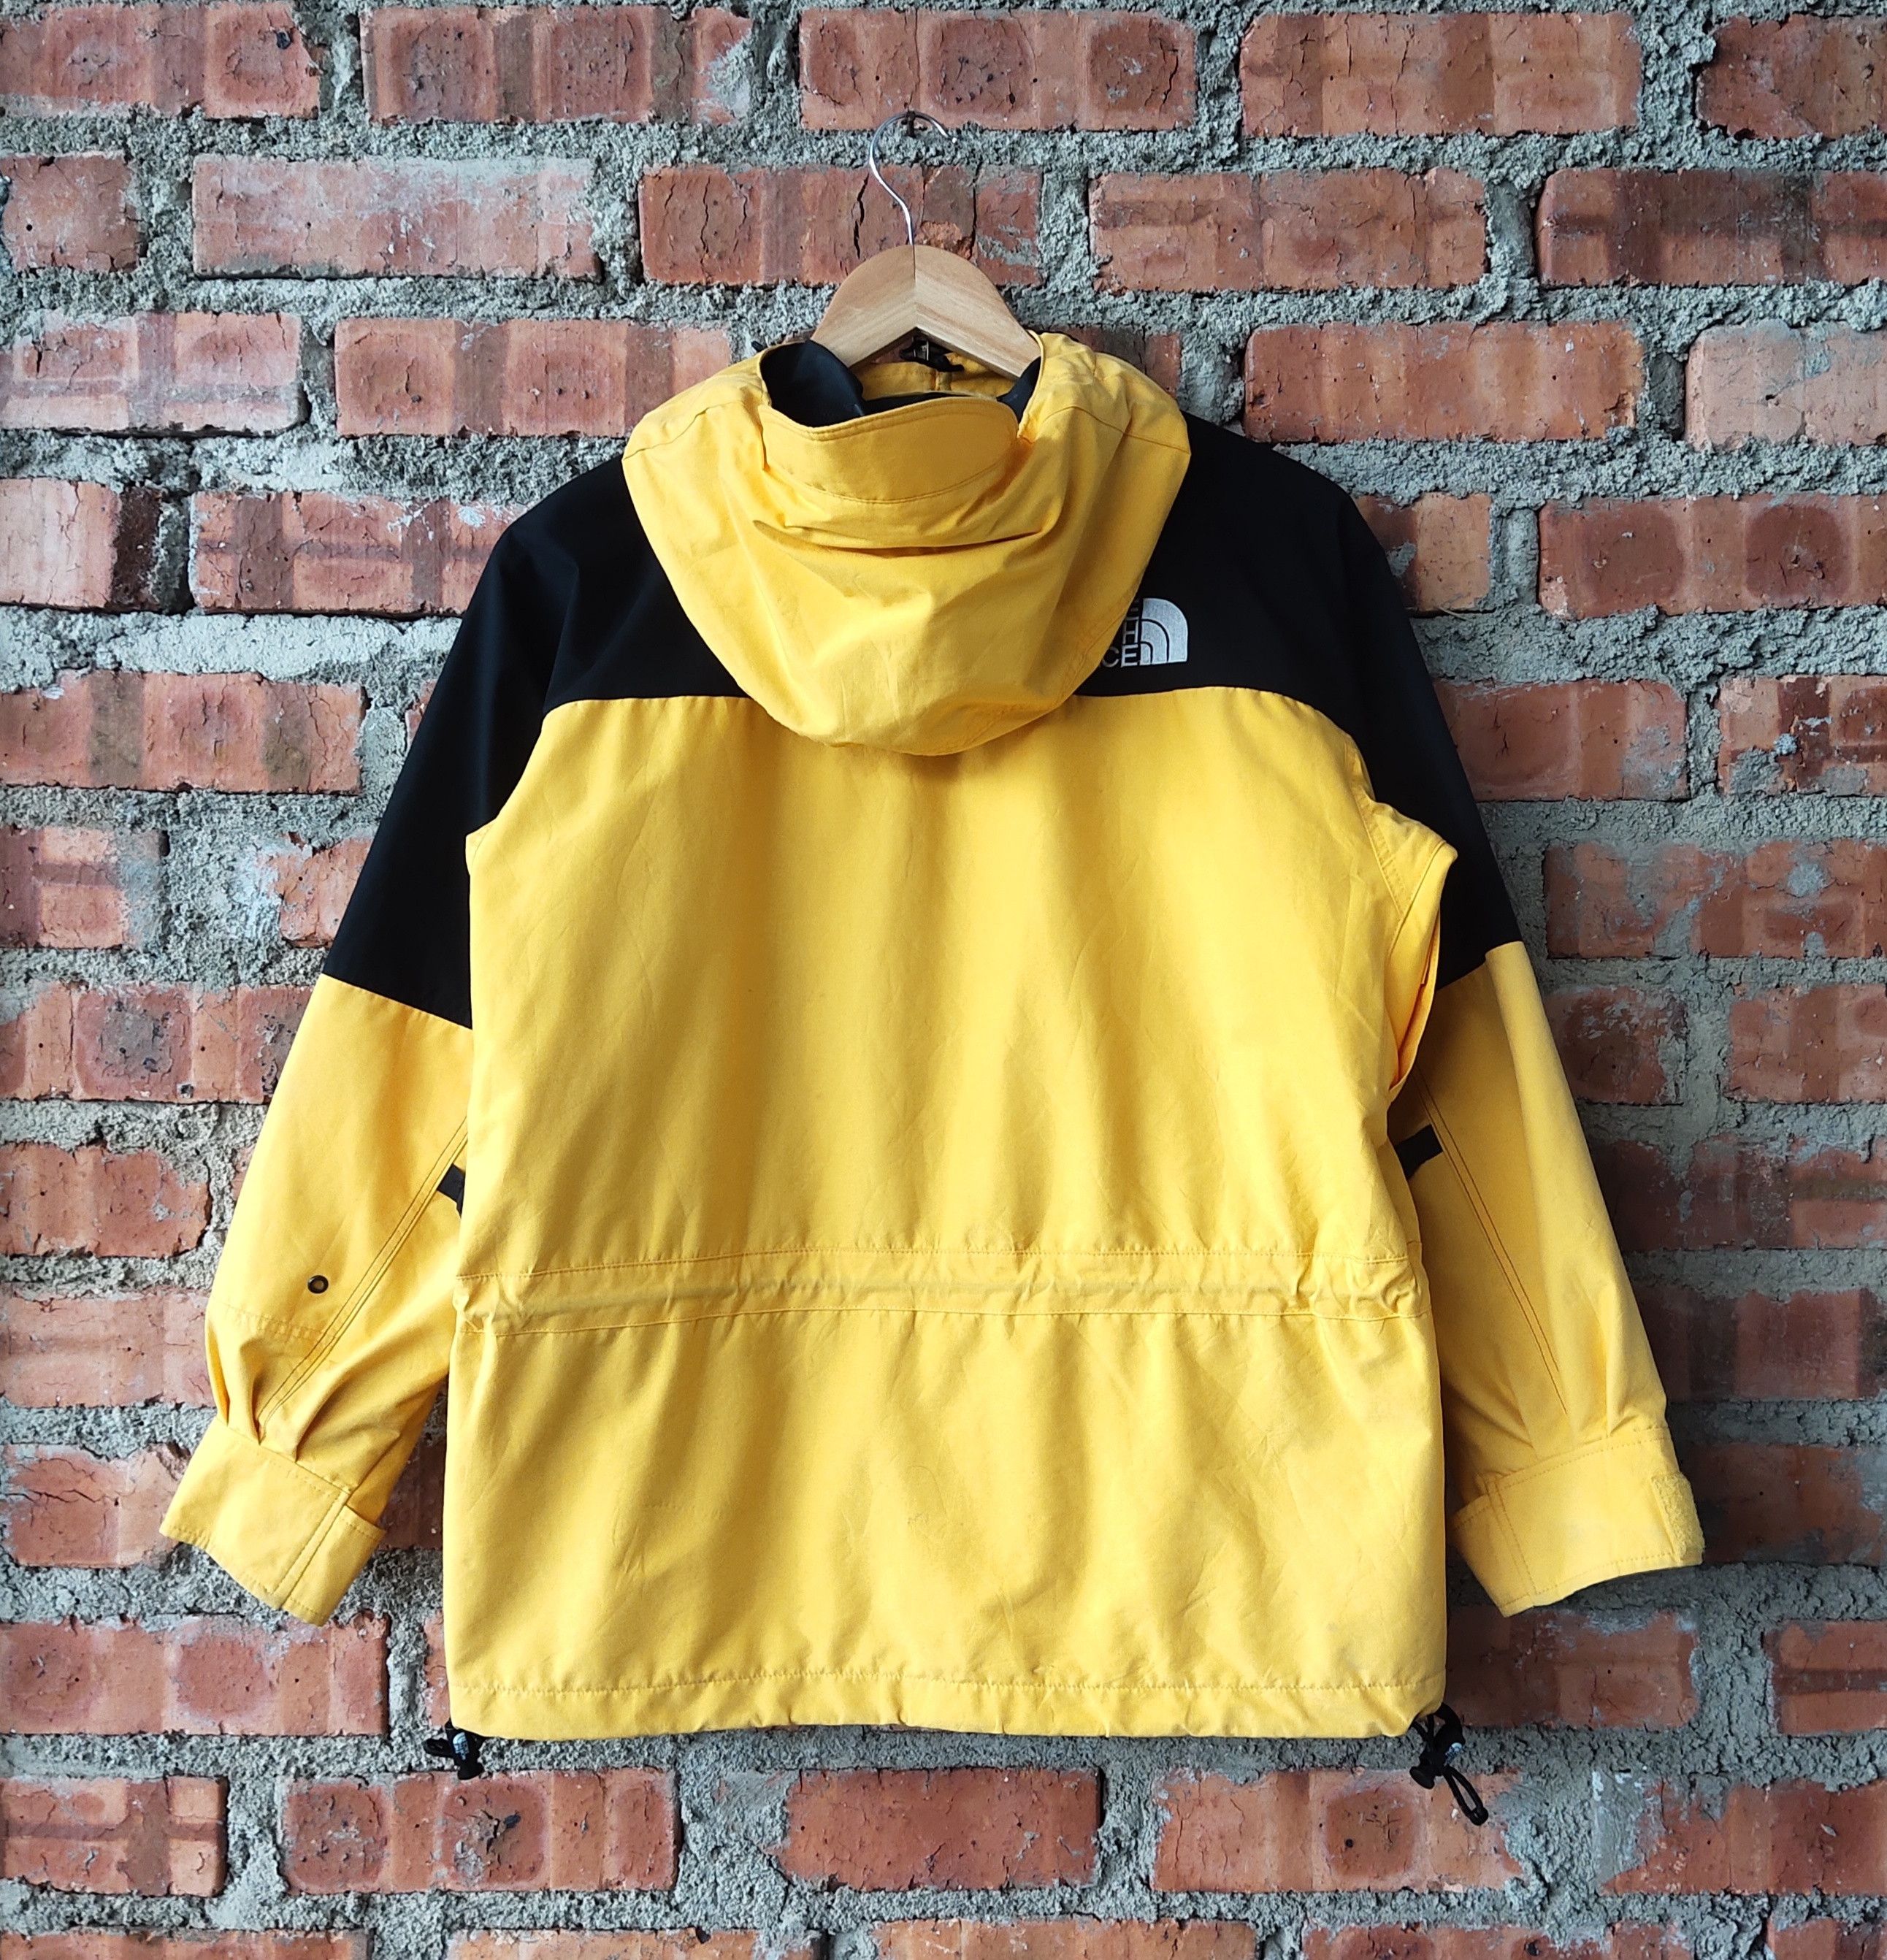 The North Face Vintage North Face Gore-Tex Yellow Jacket Size US M / EU 48-50 / 2 - 2 Preview